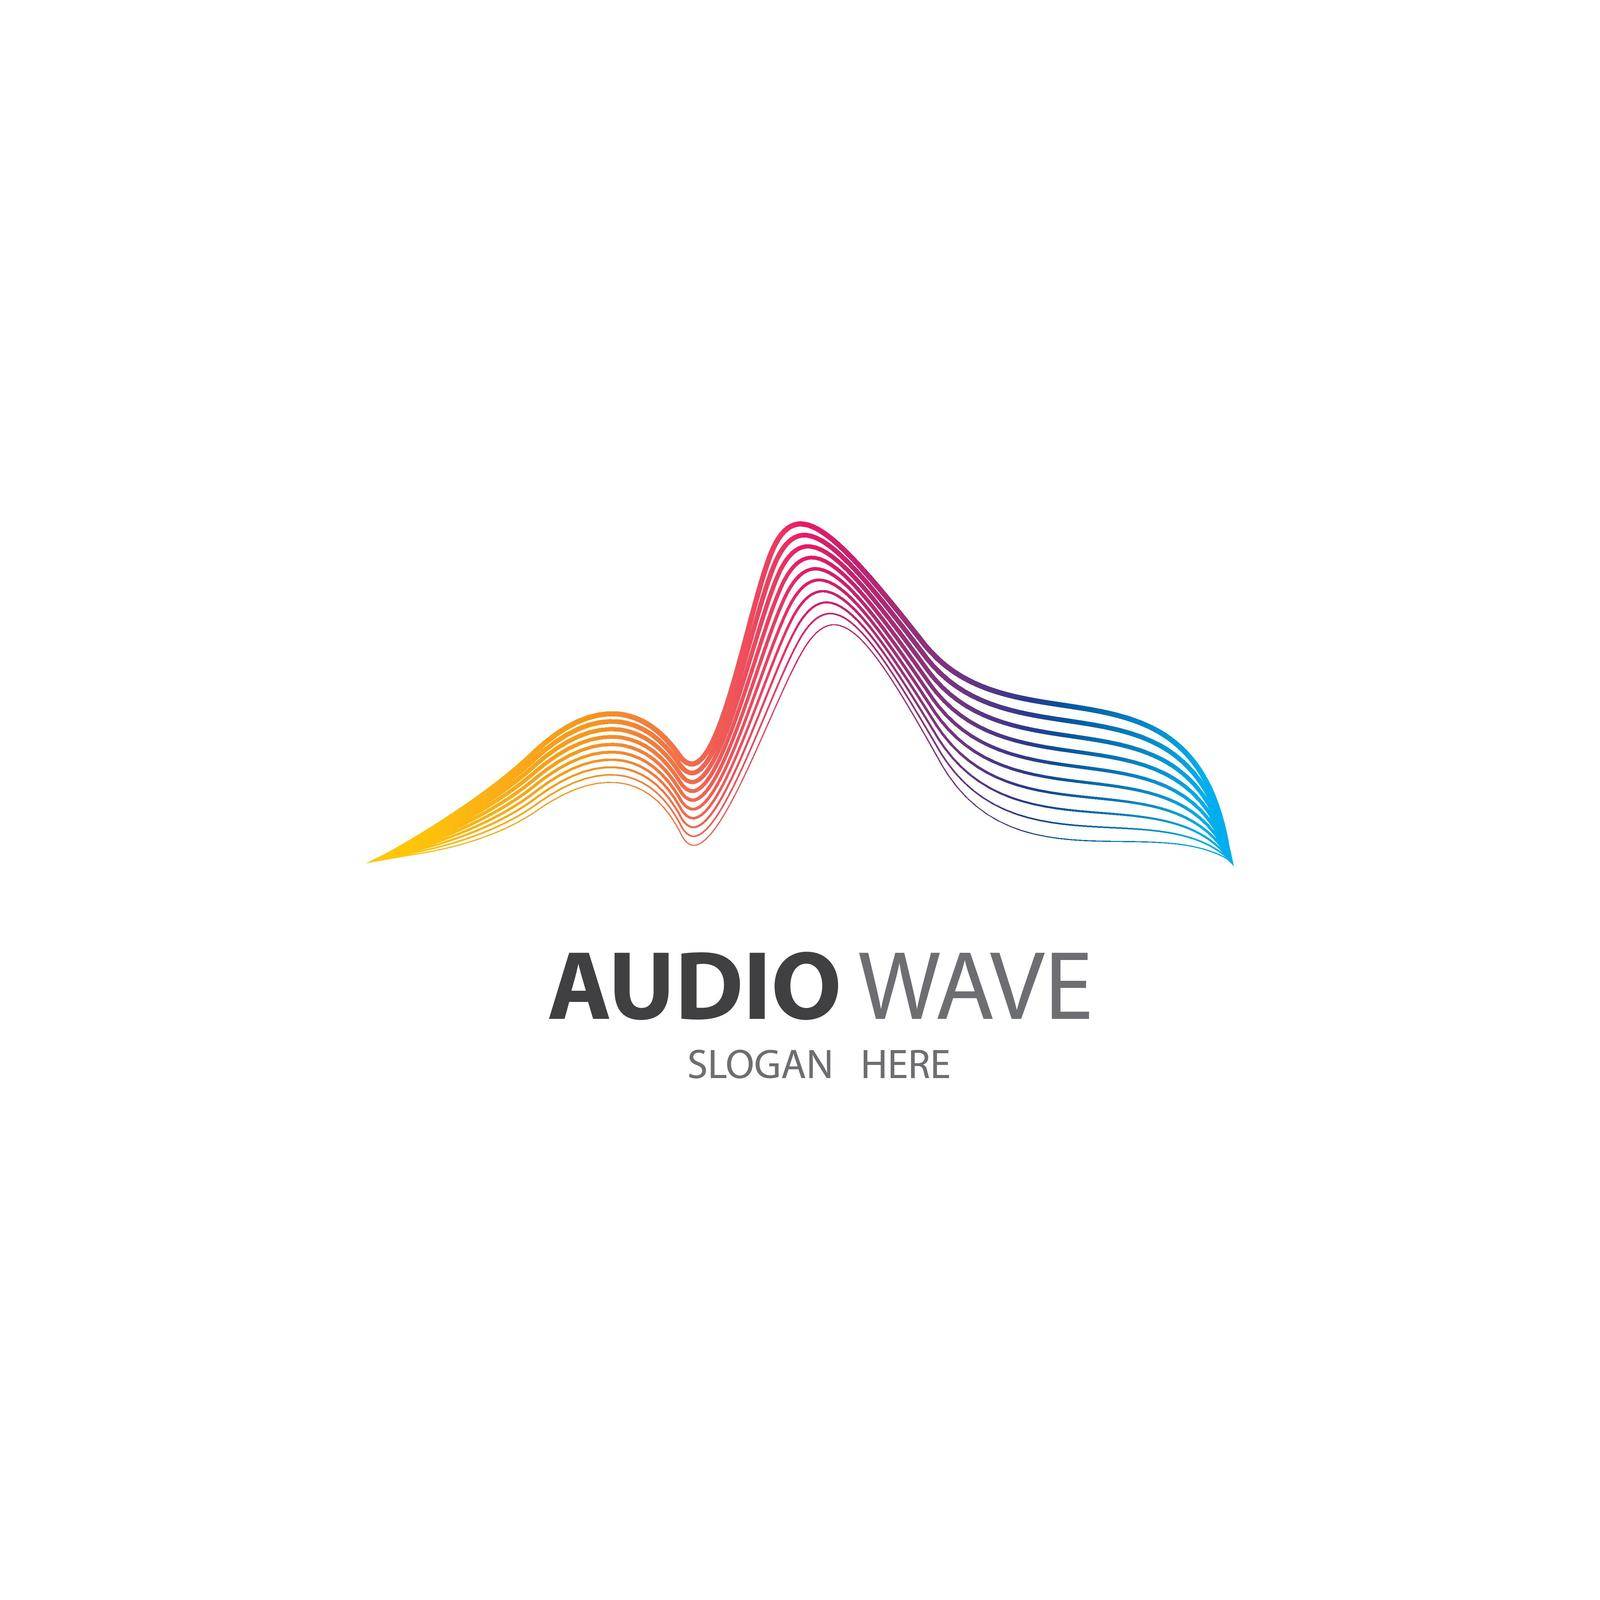 Audio wave images by Attades19